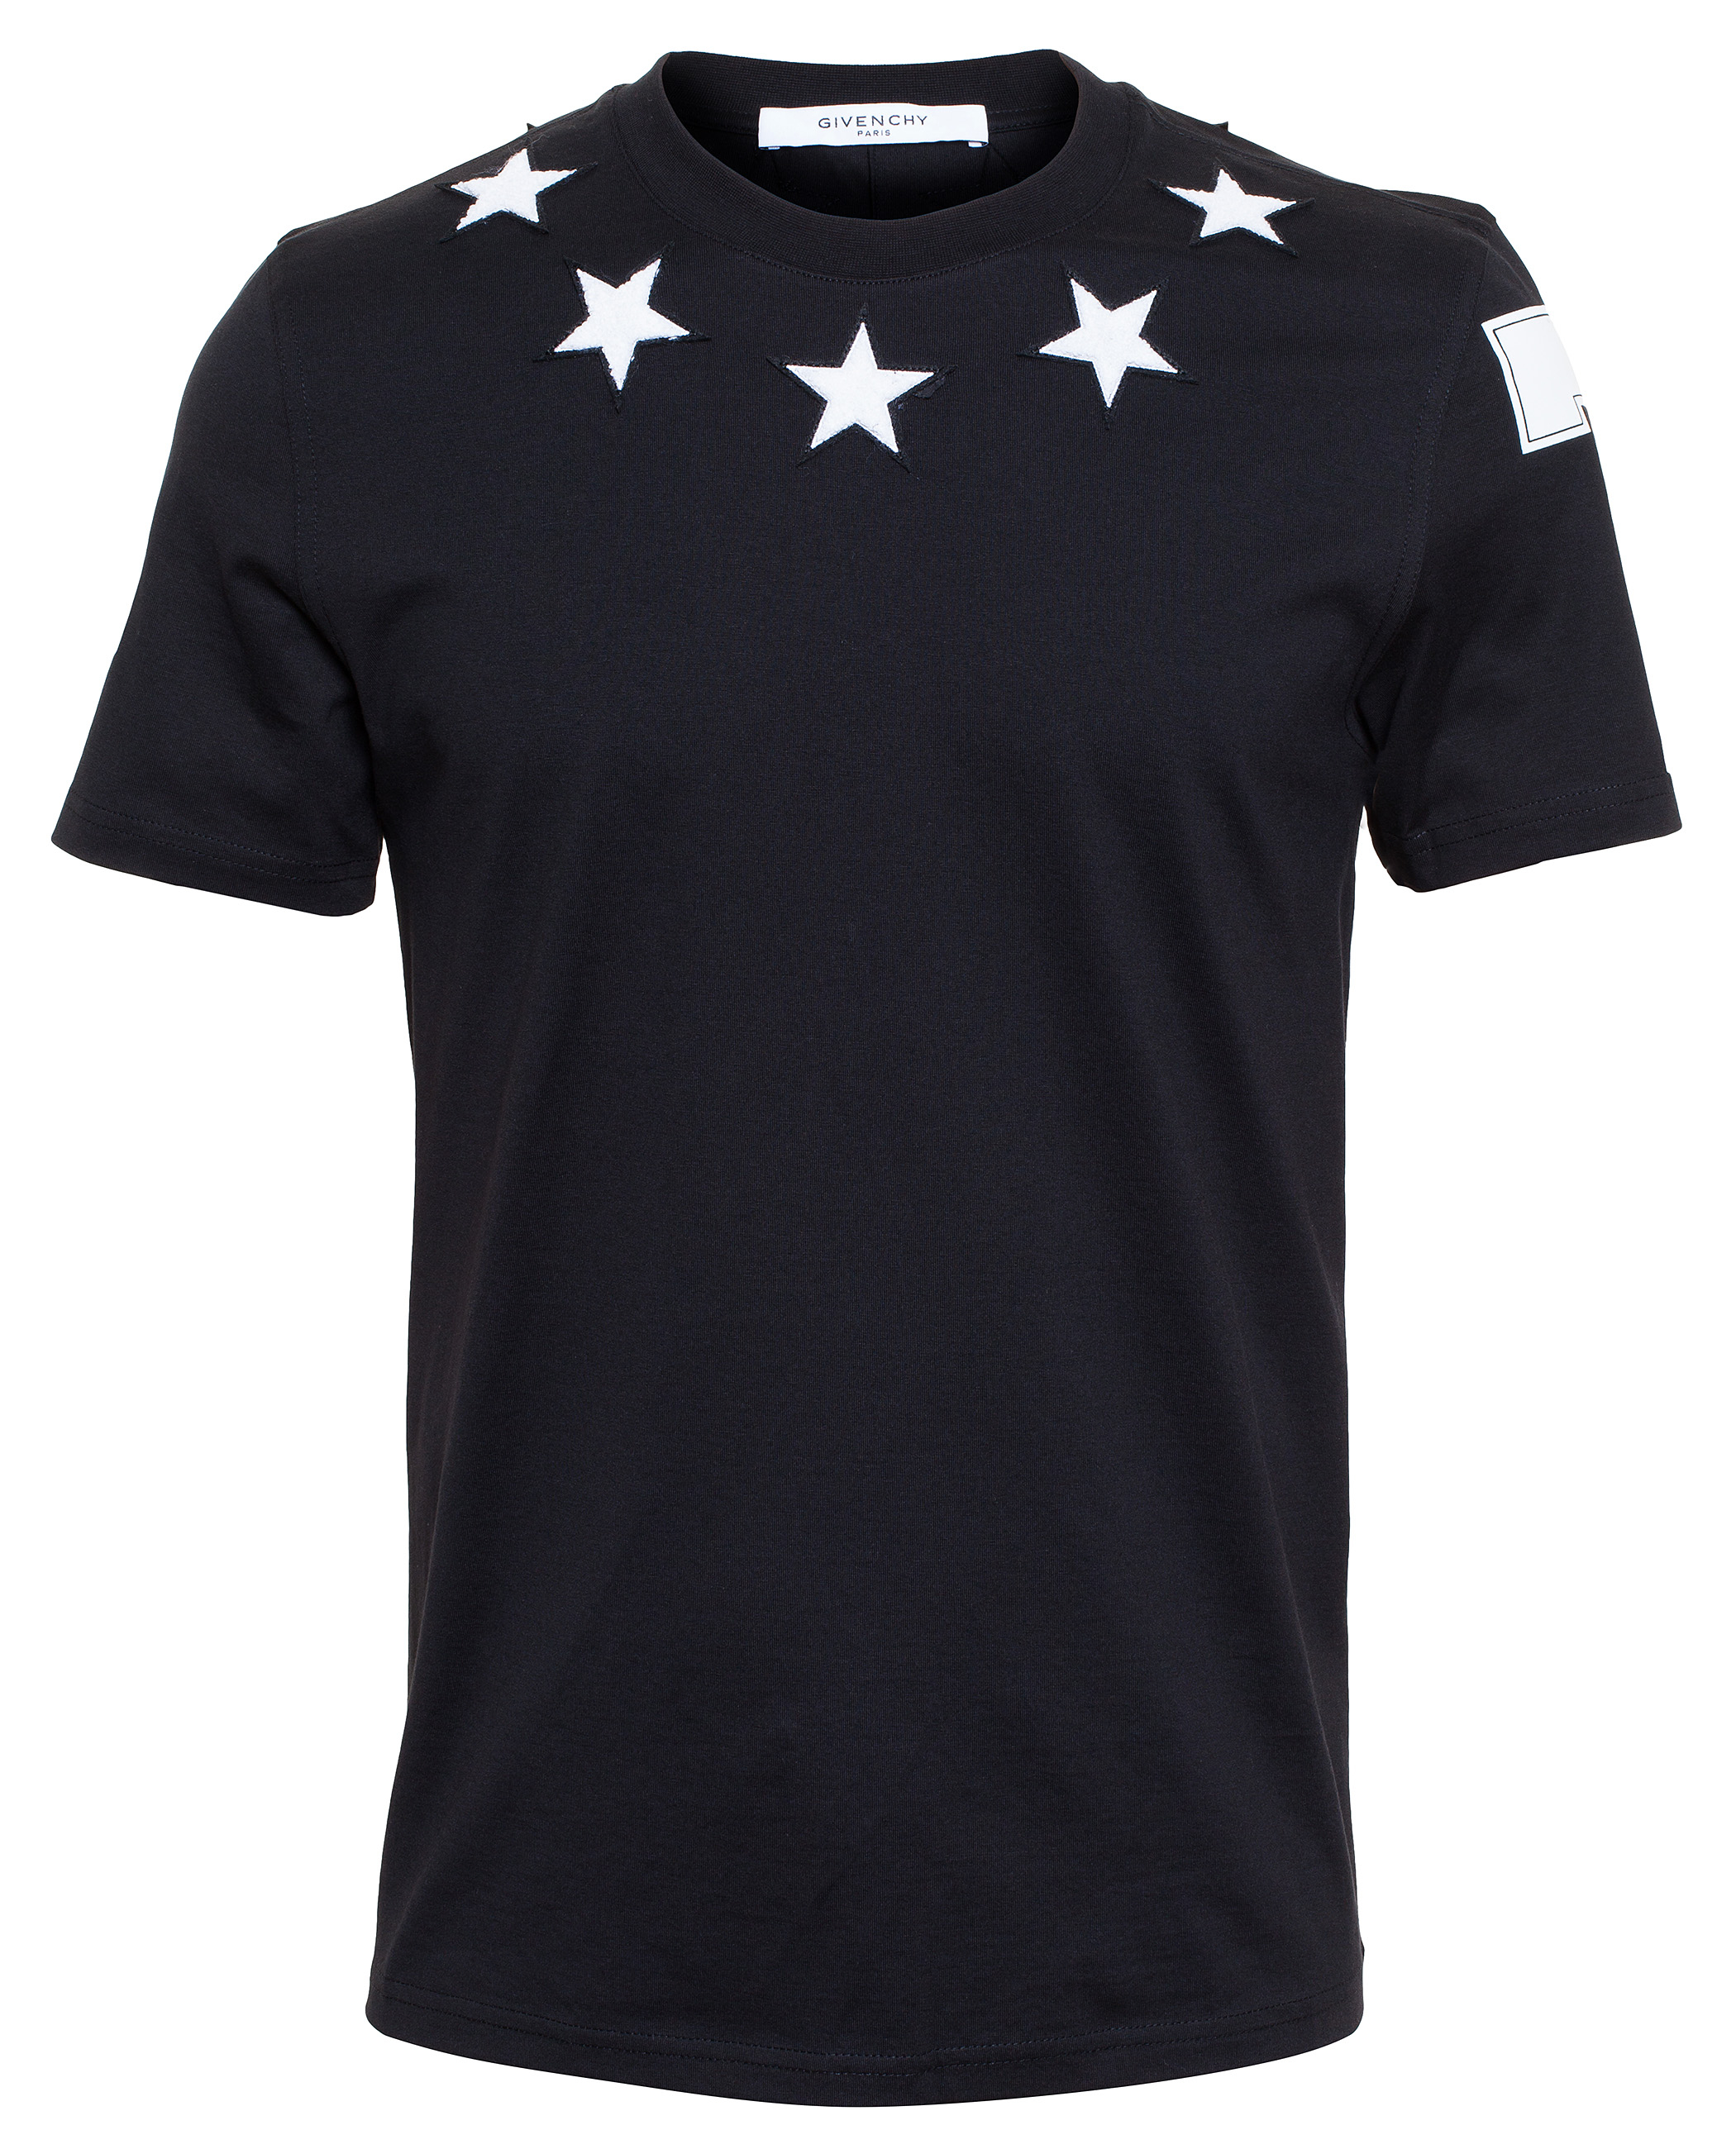 Givenchy Star T-Shirt in Black for Men - Lyst